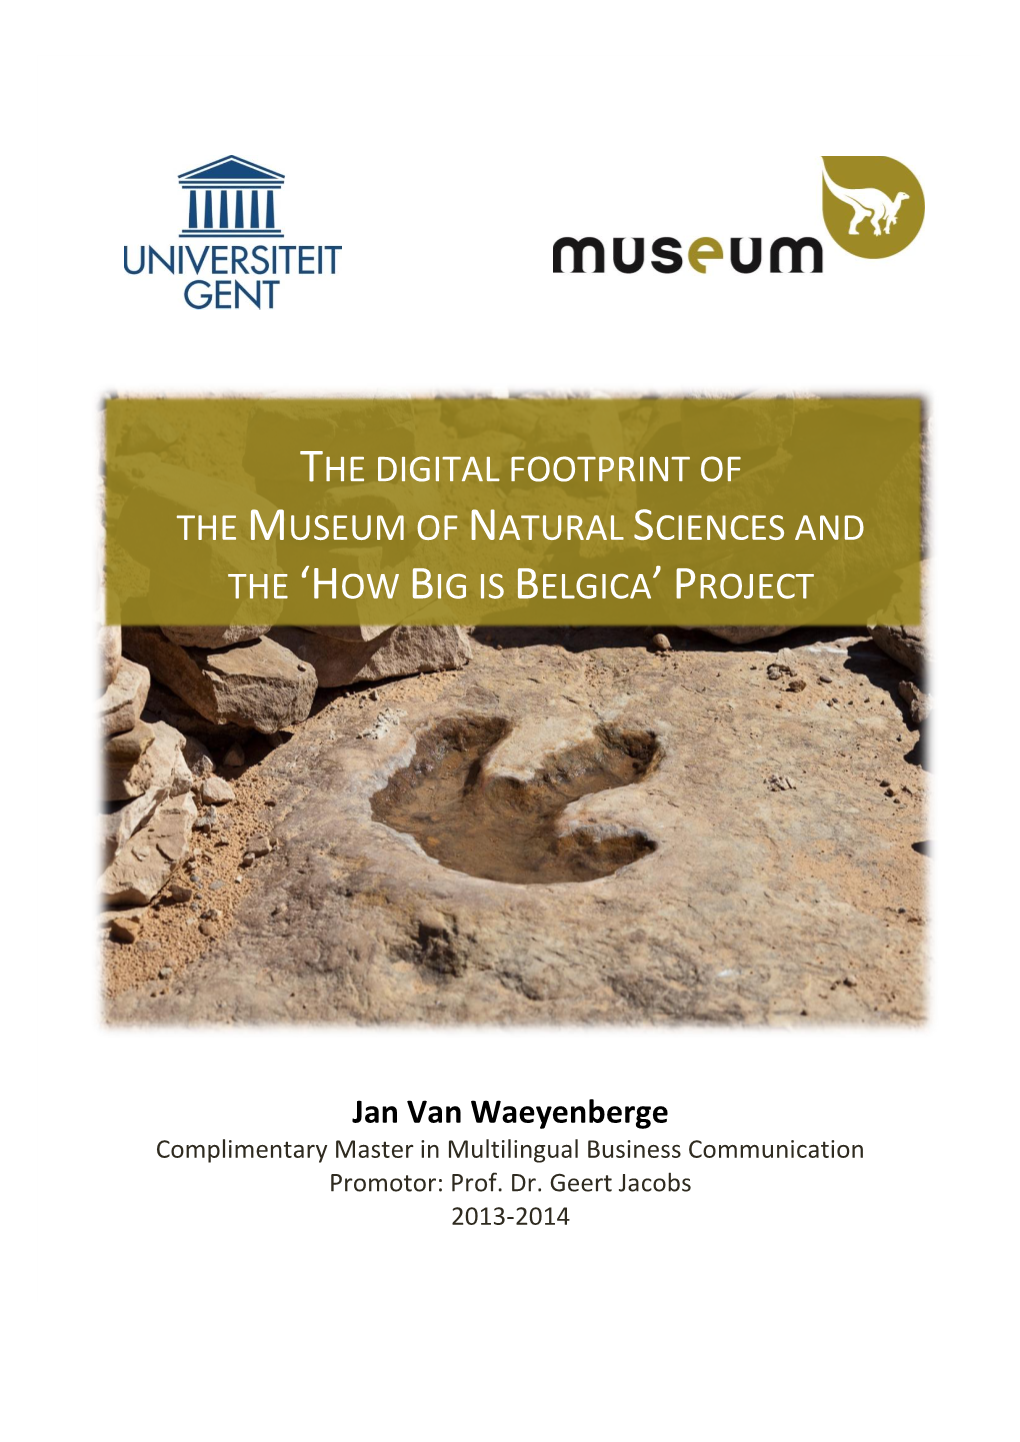 The Digital Footprint of the Museum of Natural Sciences and the 'How Big